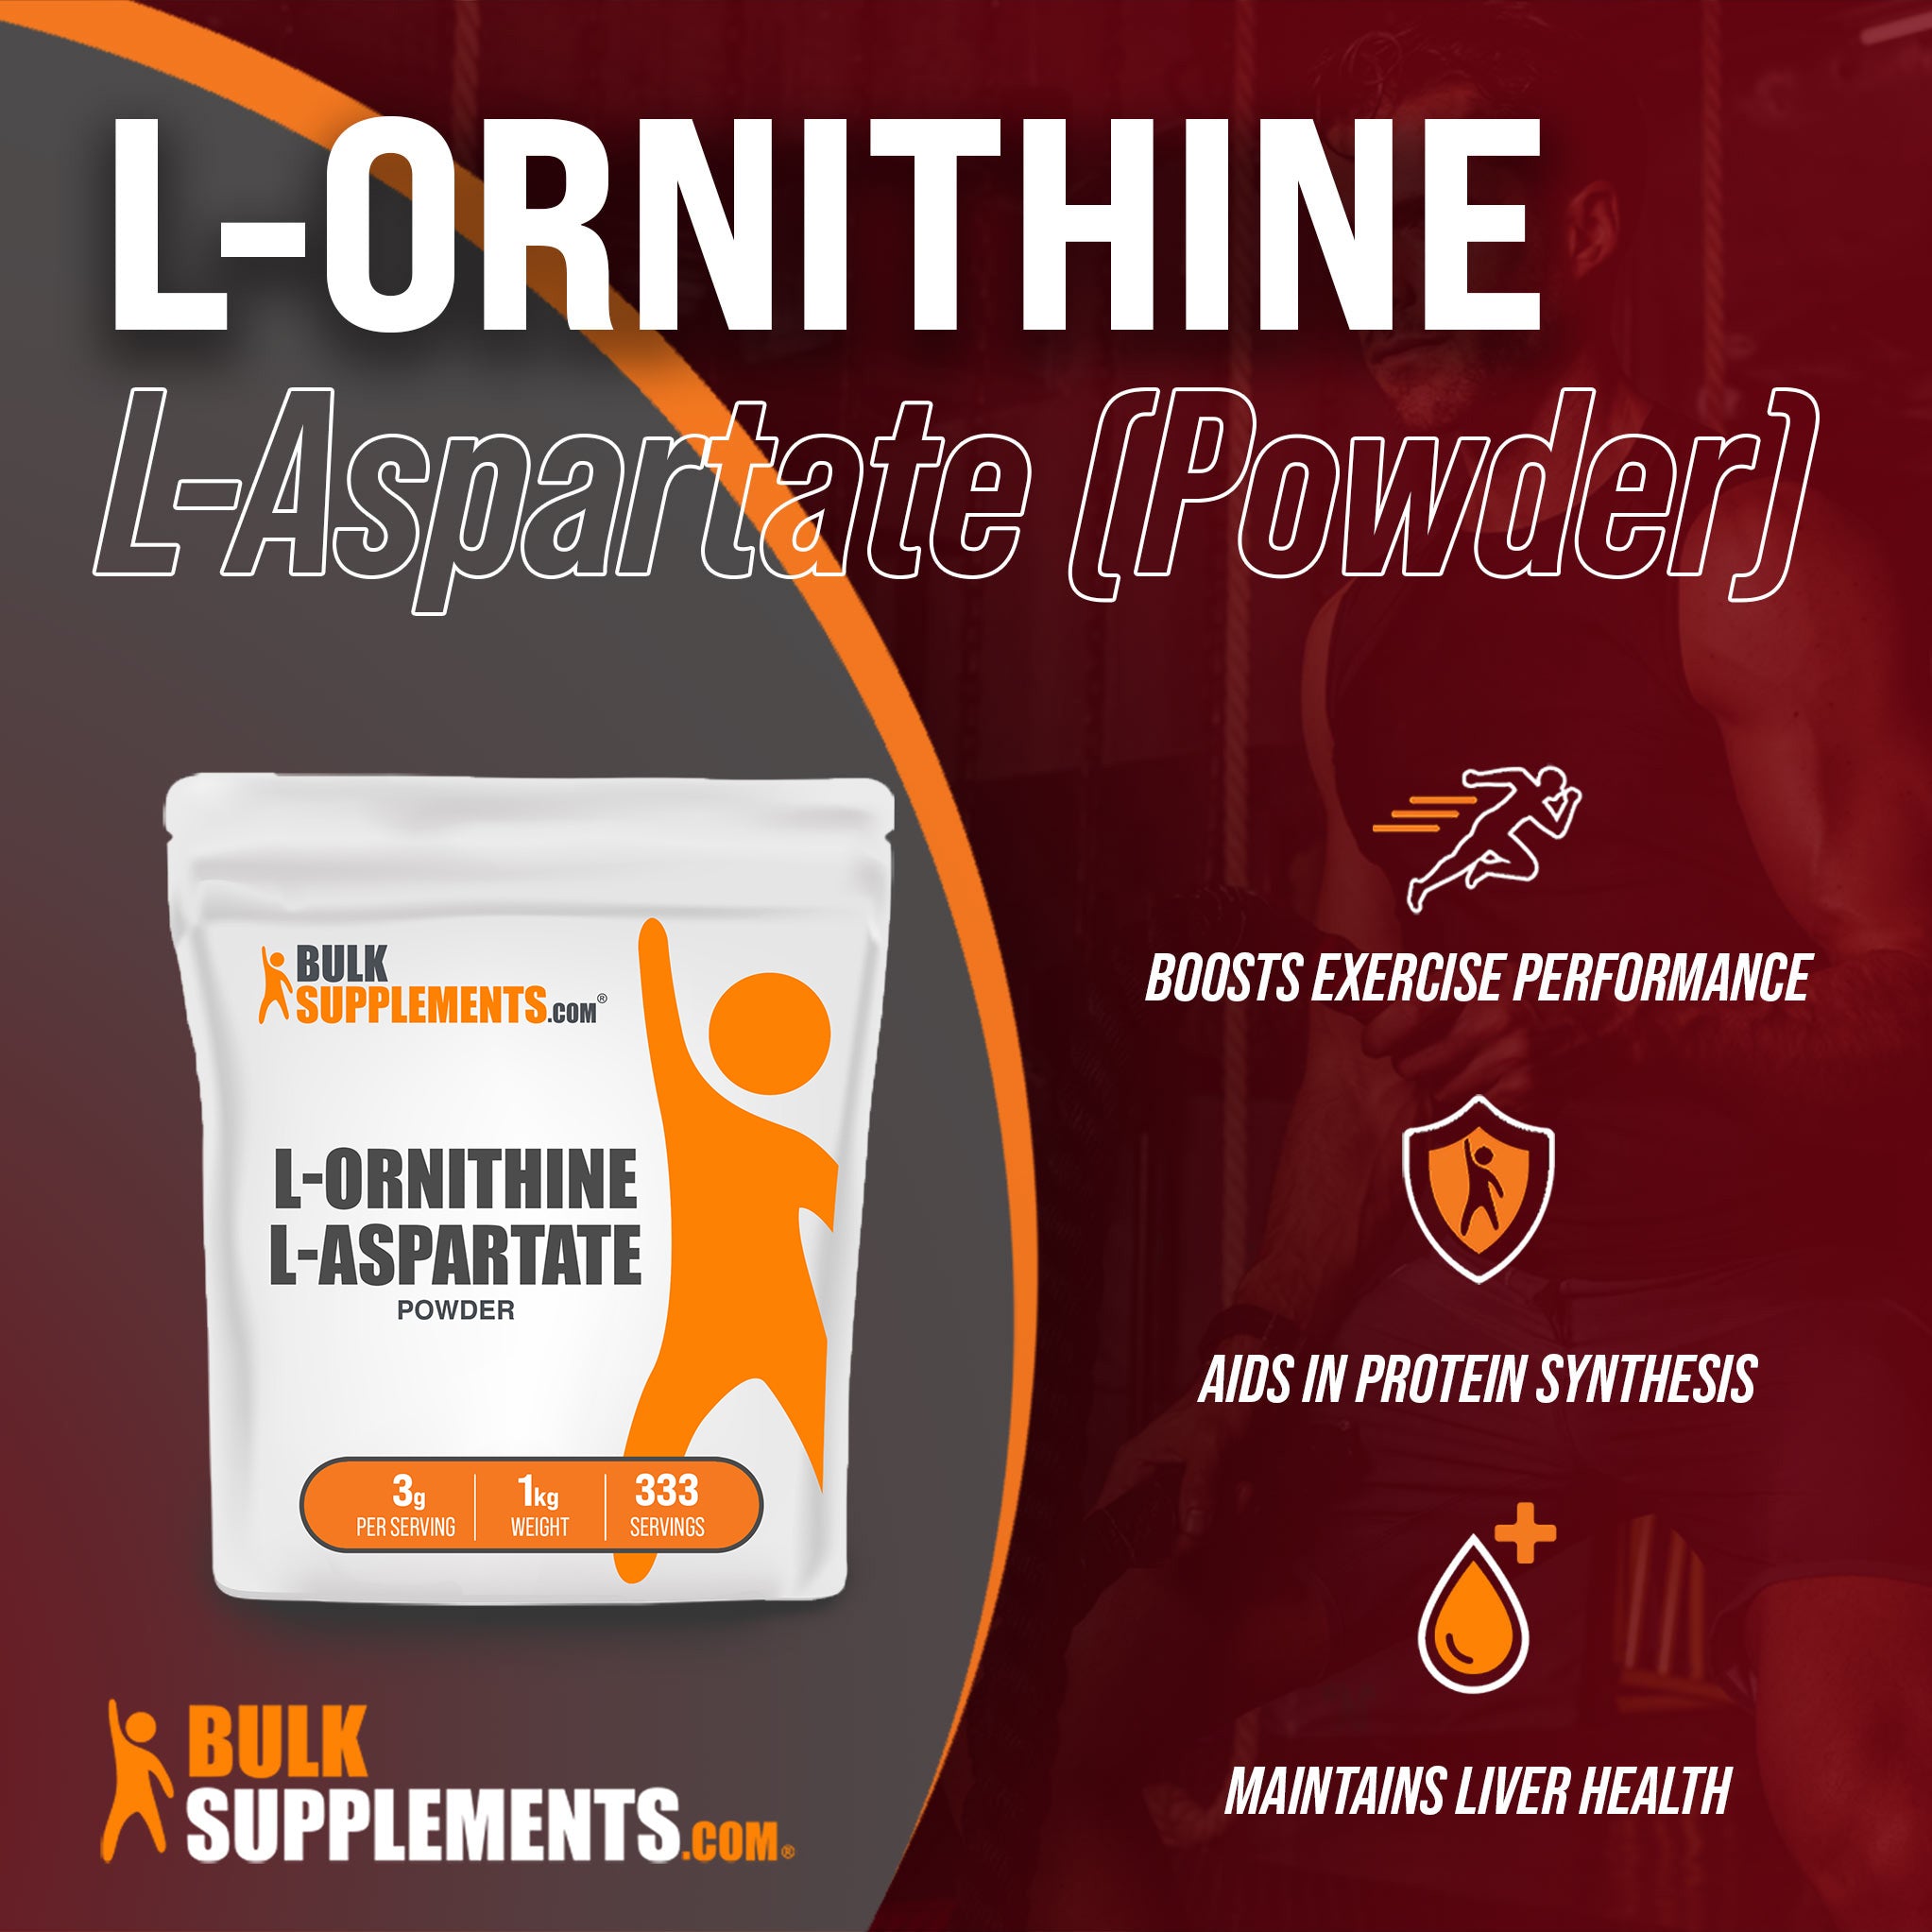 Benefits of L-Ornithine L-Aspartate: boosts exercise performance, aids in protein synthesis, maintains liver health